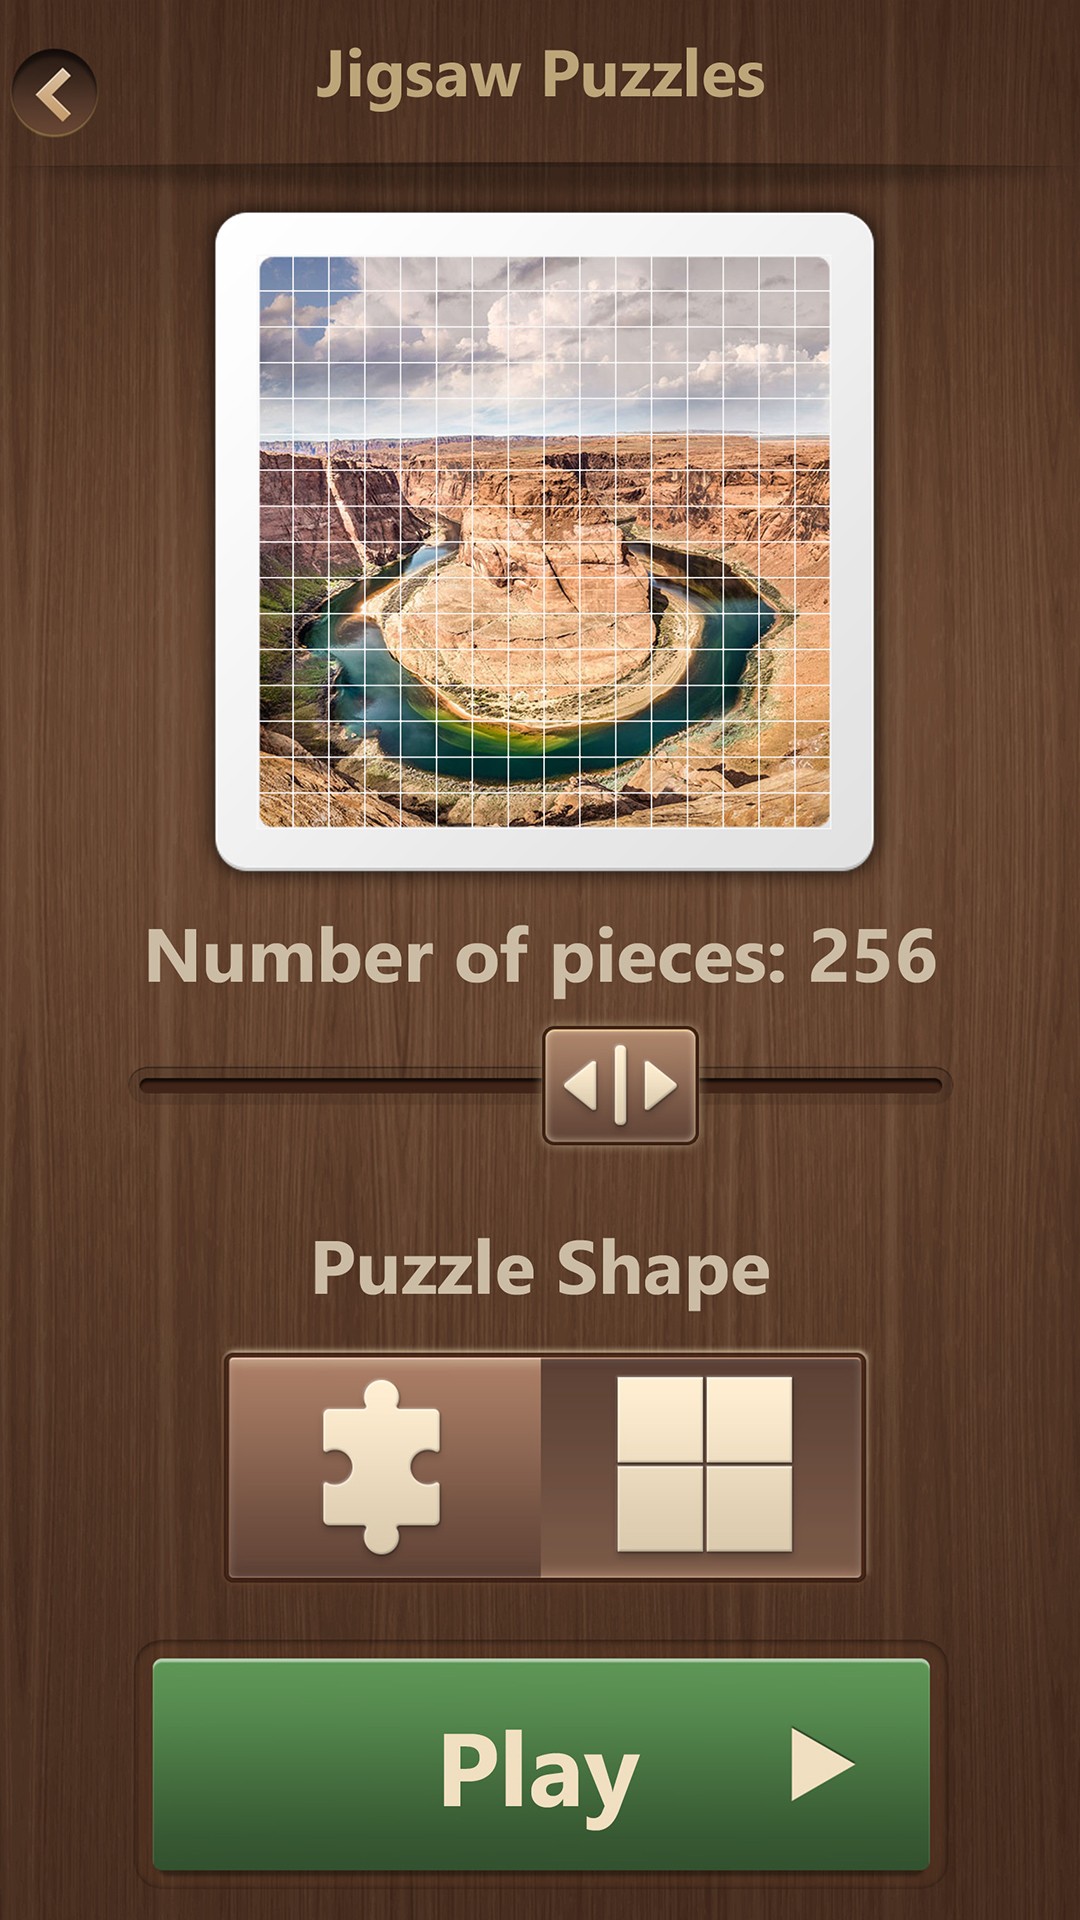 Epic Jigsaw Puzzles